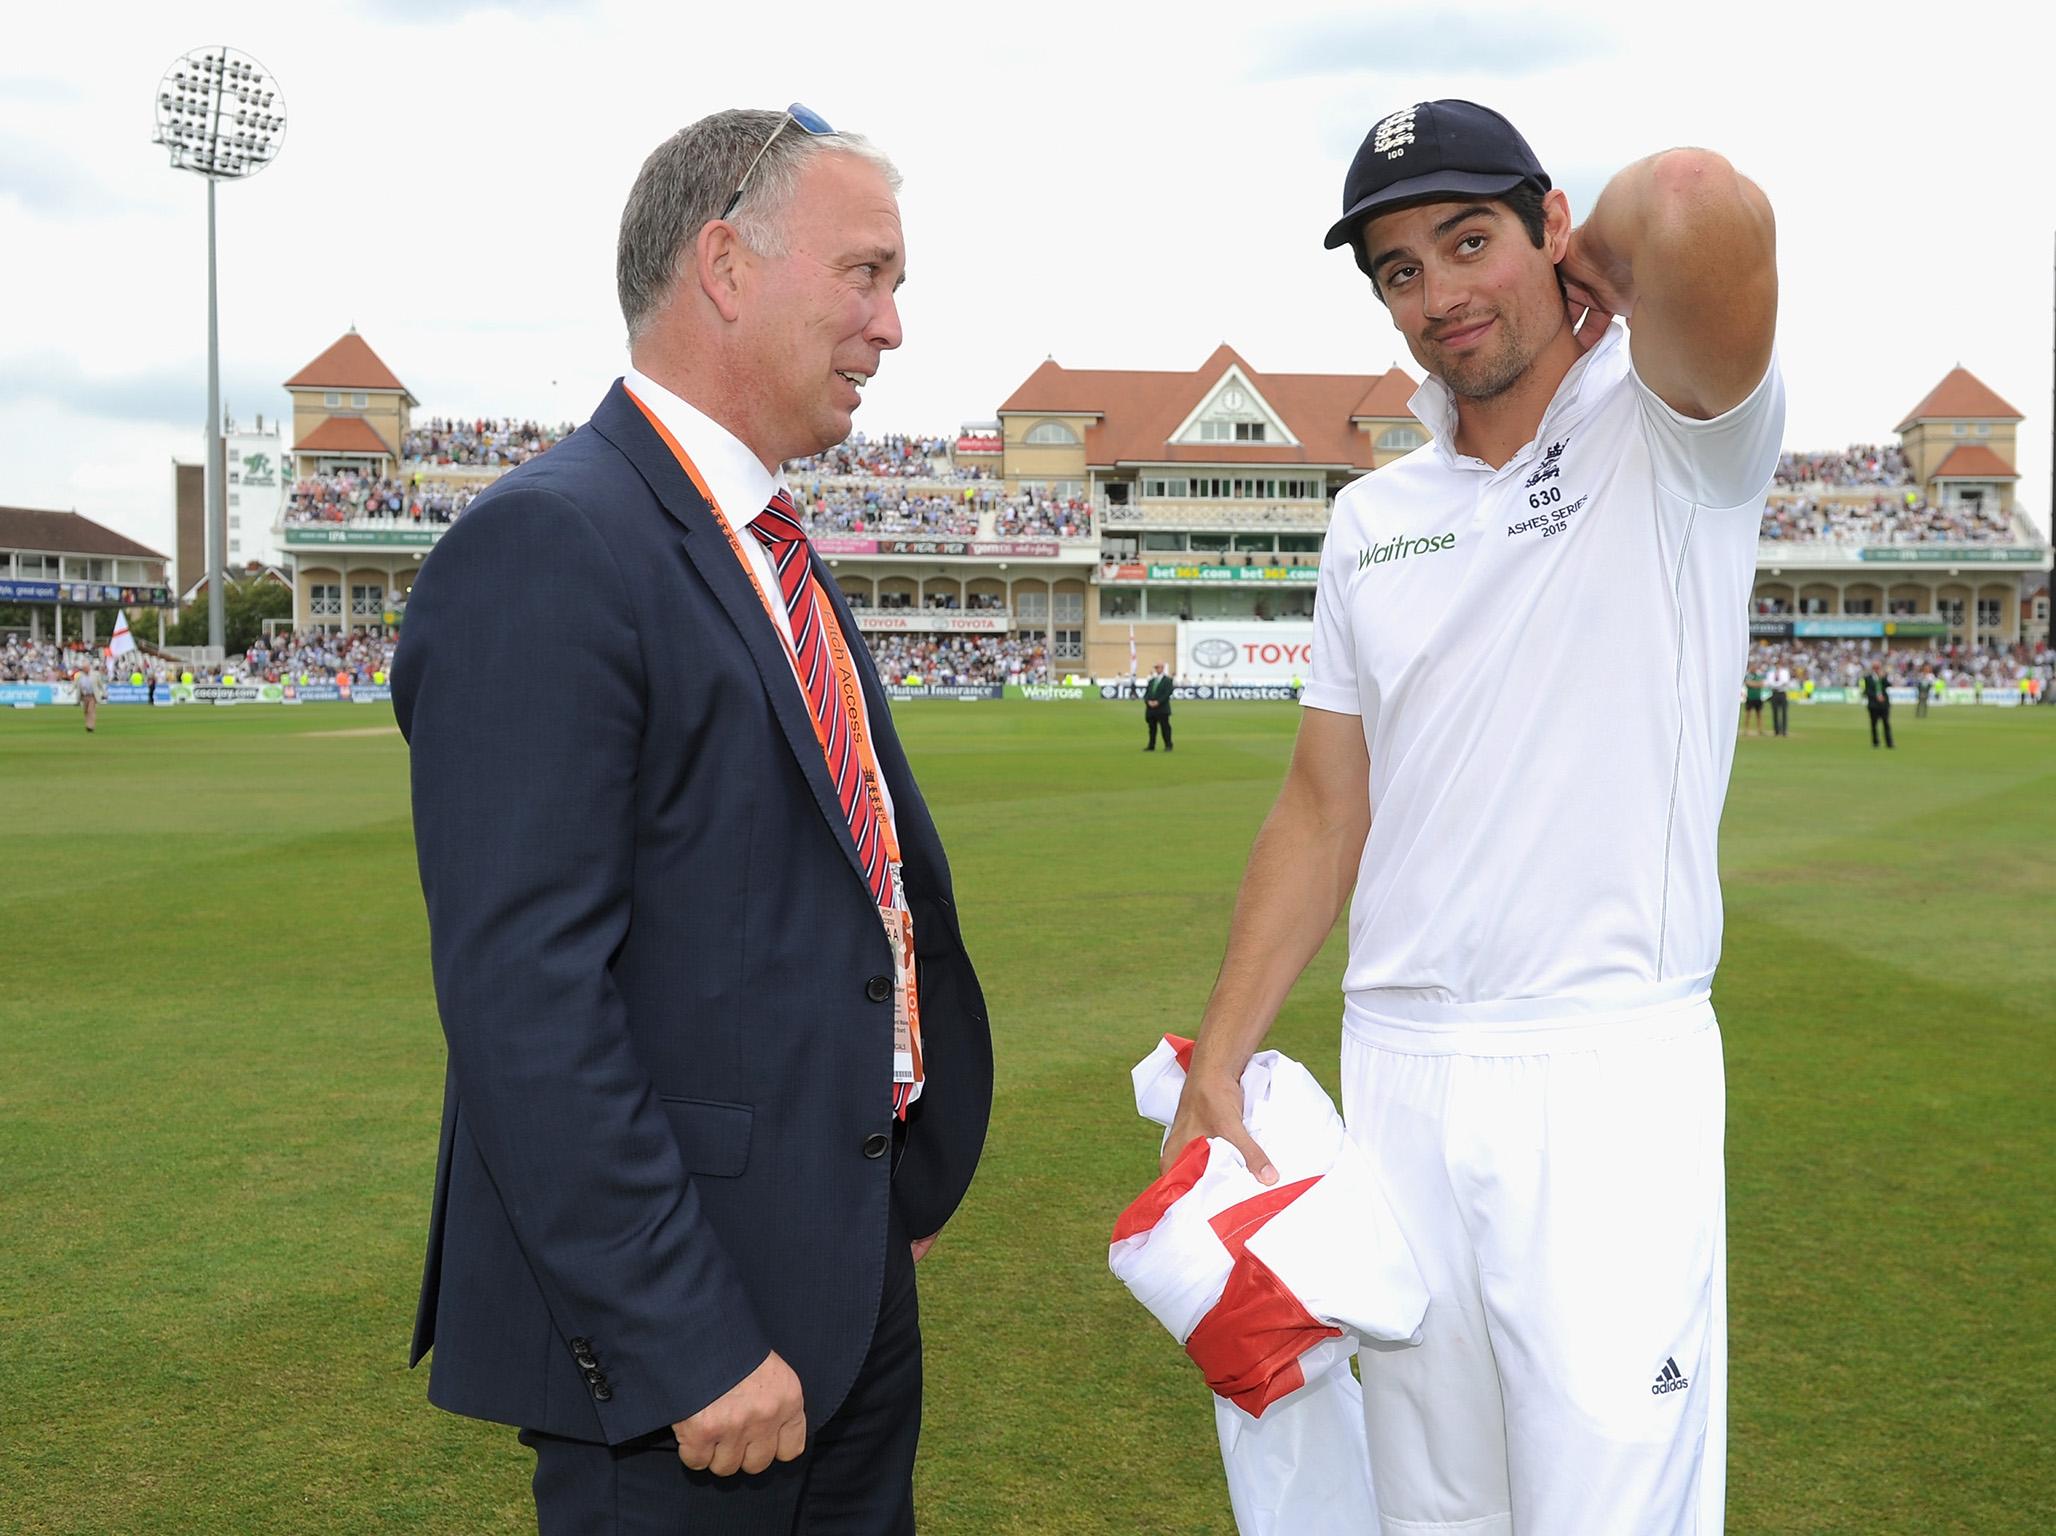 James Whitaker, left, with the former England captain Alastair Cook